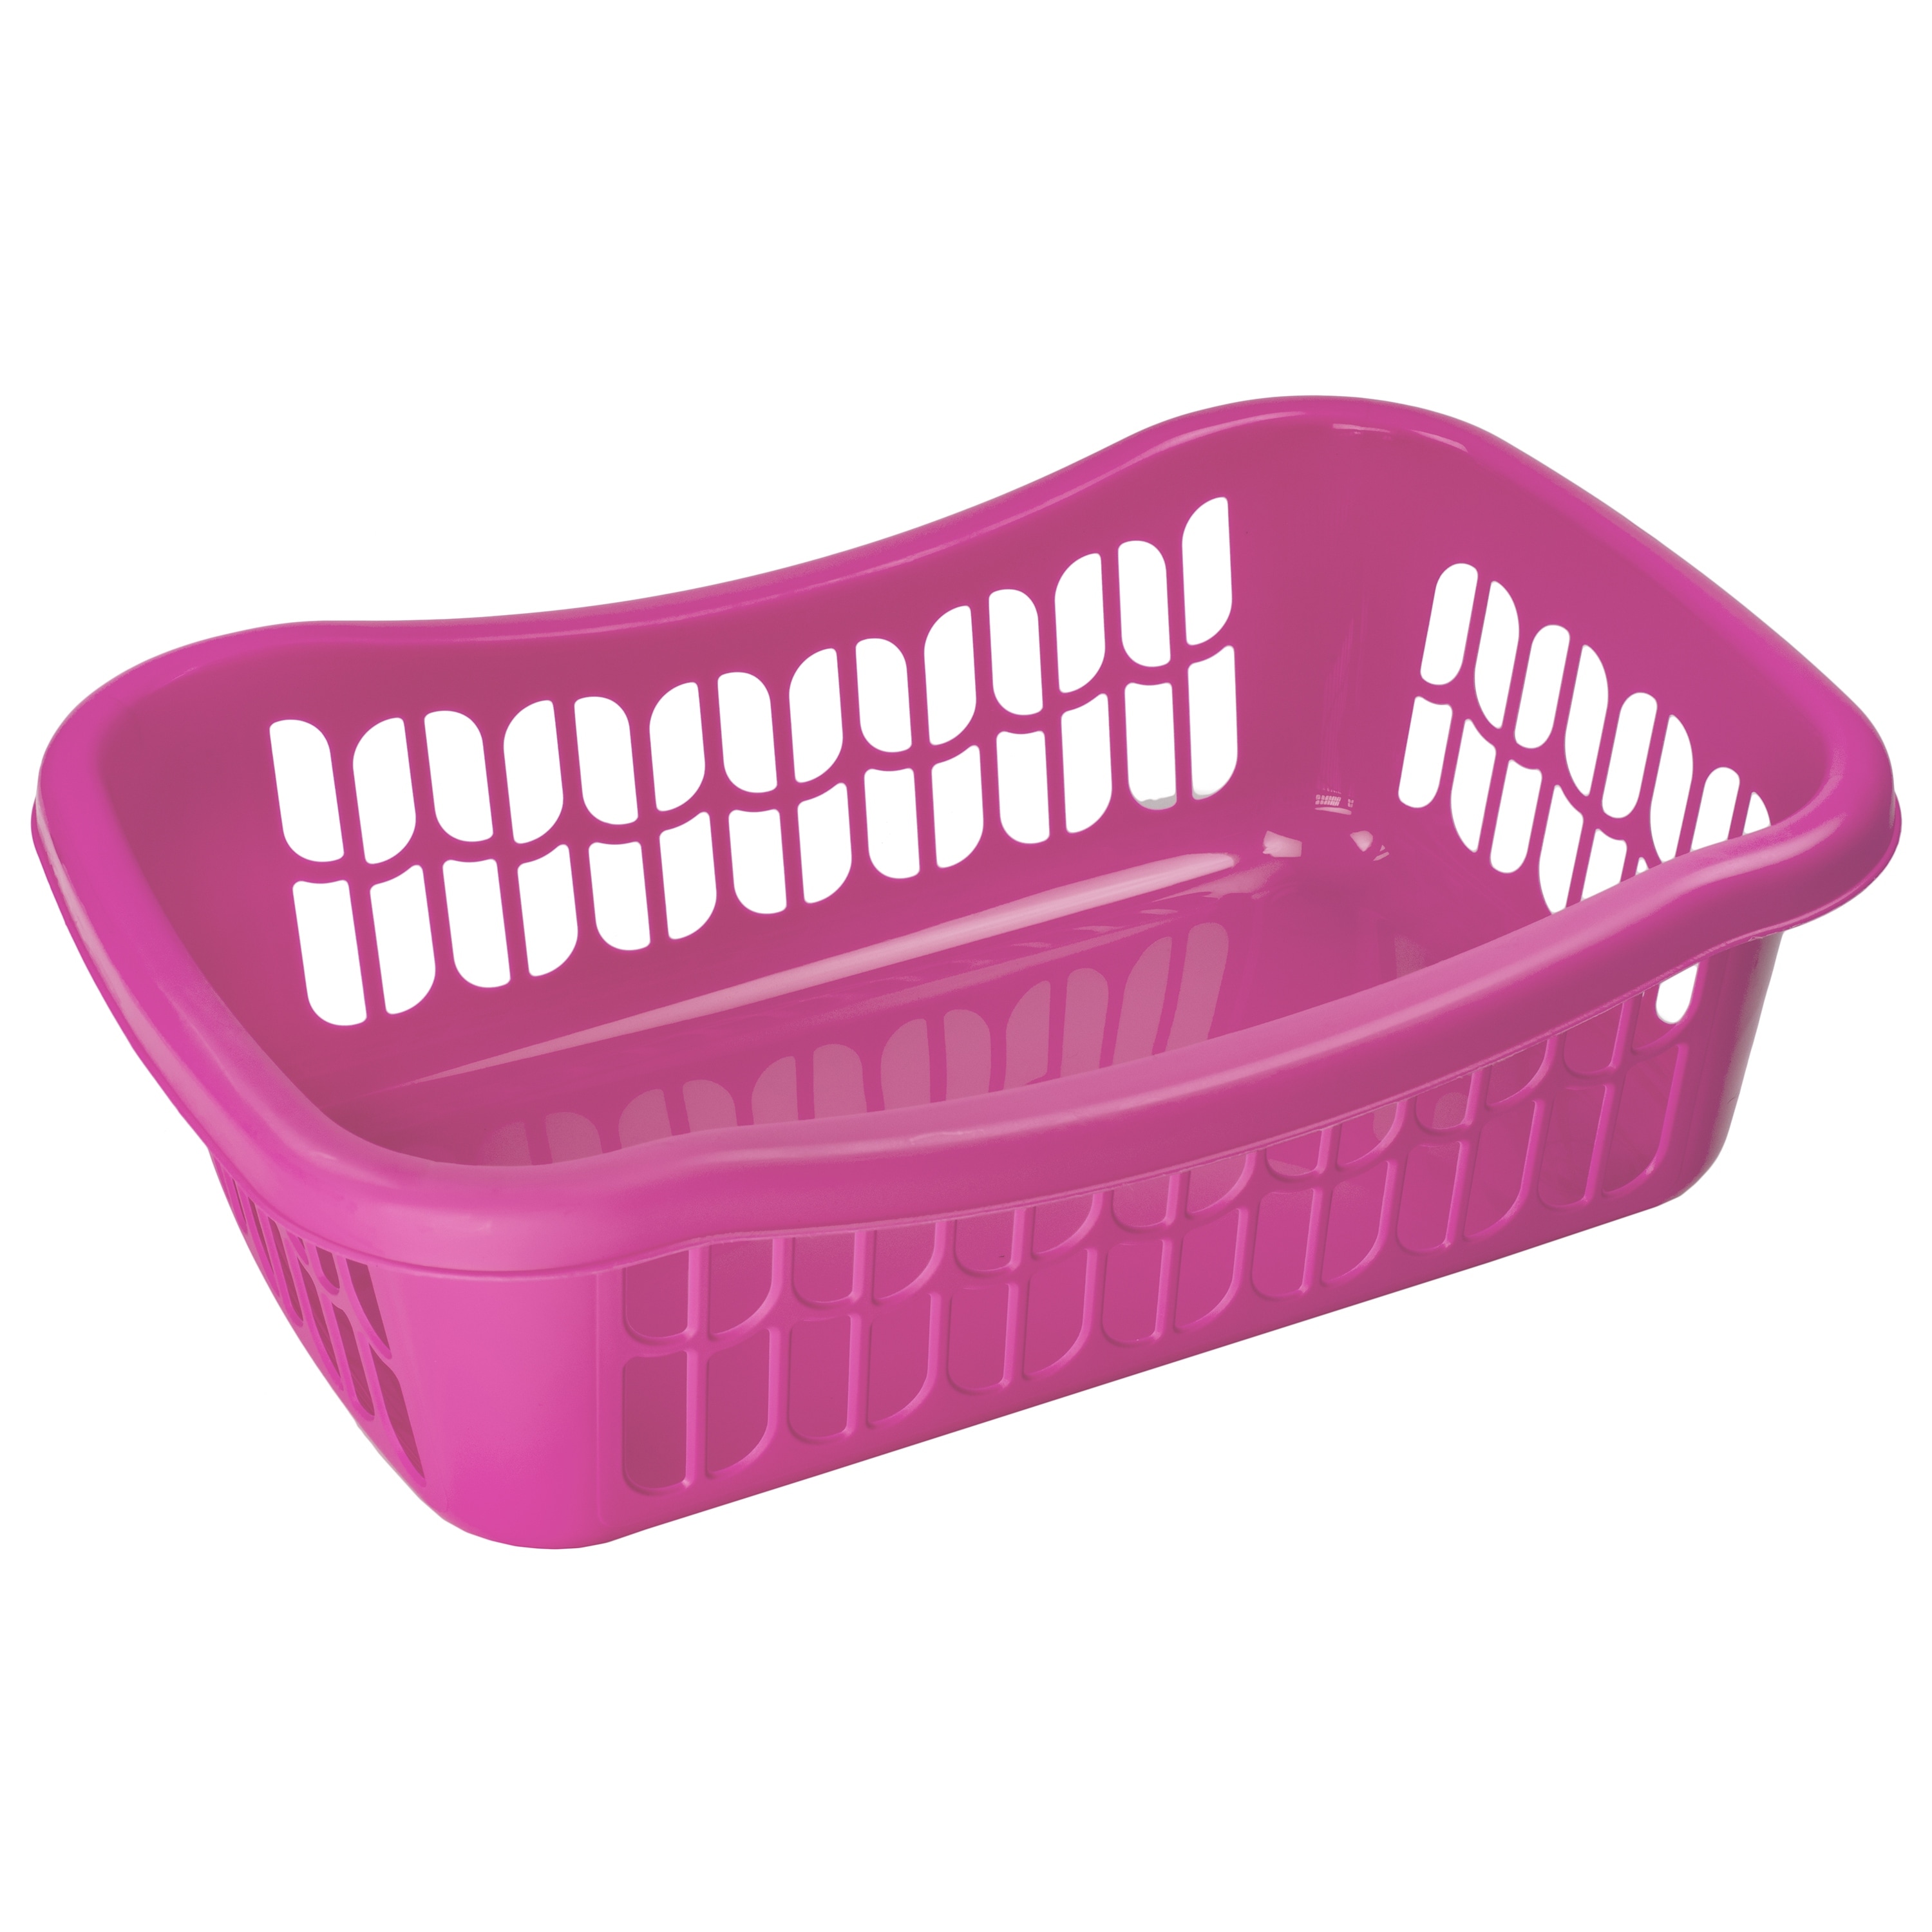 https://ak1.ostkcdn.com/images/products/is/images/direct/146a2ae09f7c44f38b7197bda2013ec10099ed01/Large-Plastic-Storage-Basket-for-Kitchen-Pantry%2C-Kids-Room%2C-Office.jpg